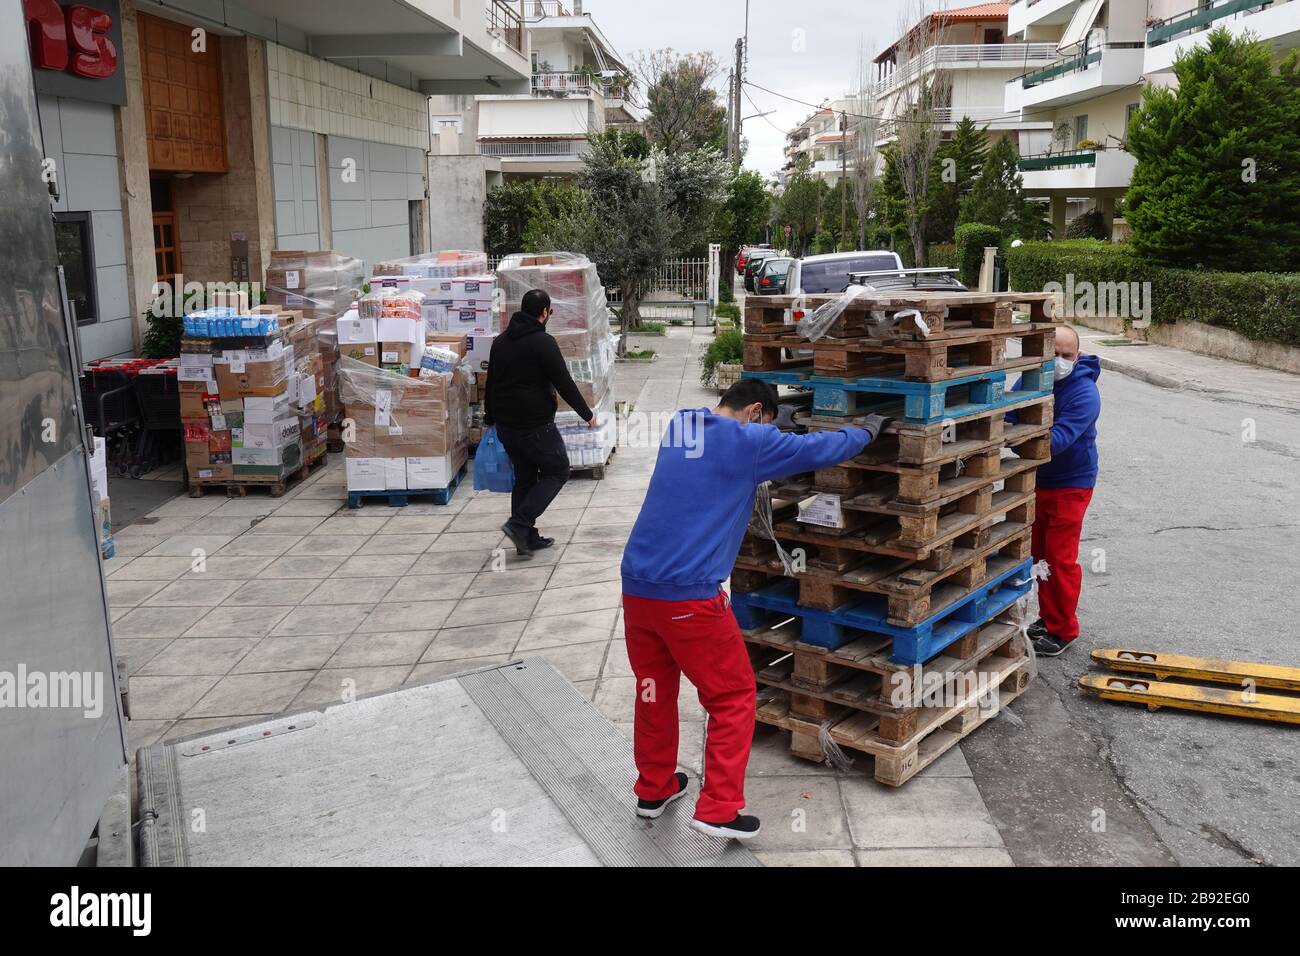 Athens, Greece - March 16, 2020: Supermarket customer with shopping bag and warehouse workers wearing surgical masks unload boxes of food products fro Stock Photo